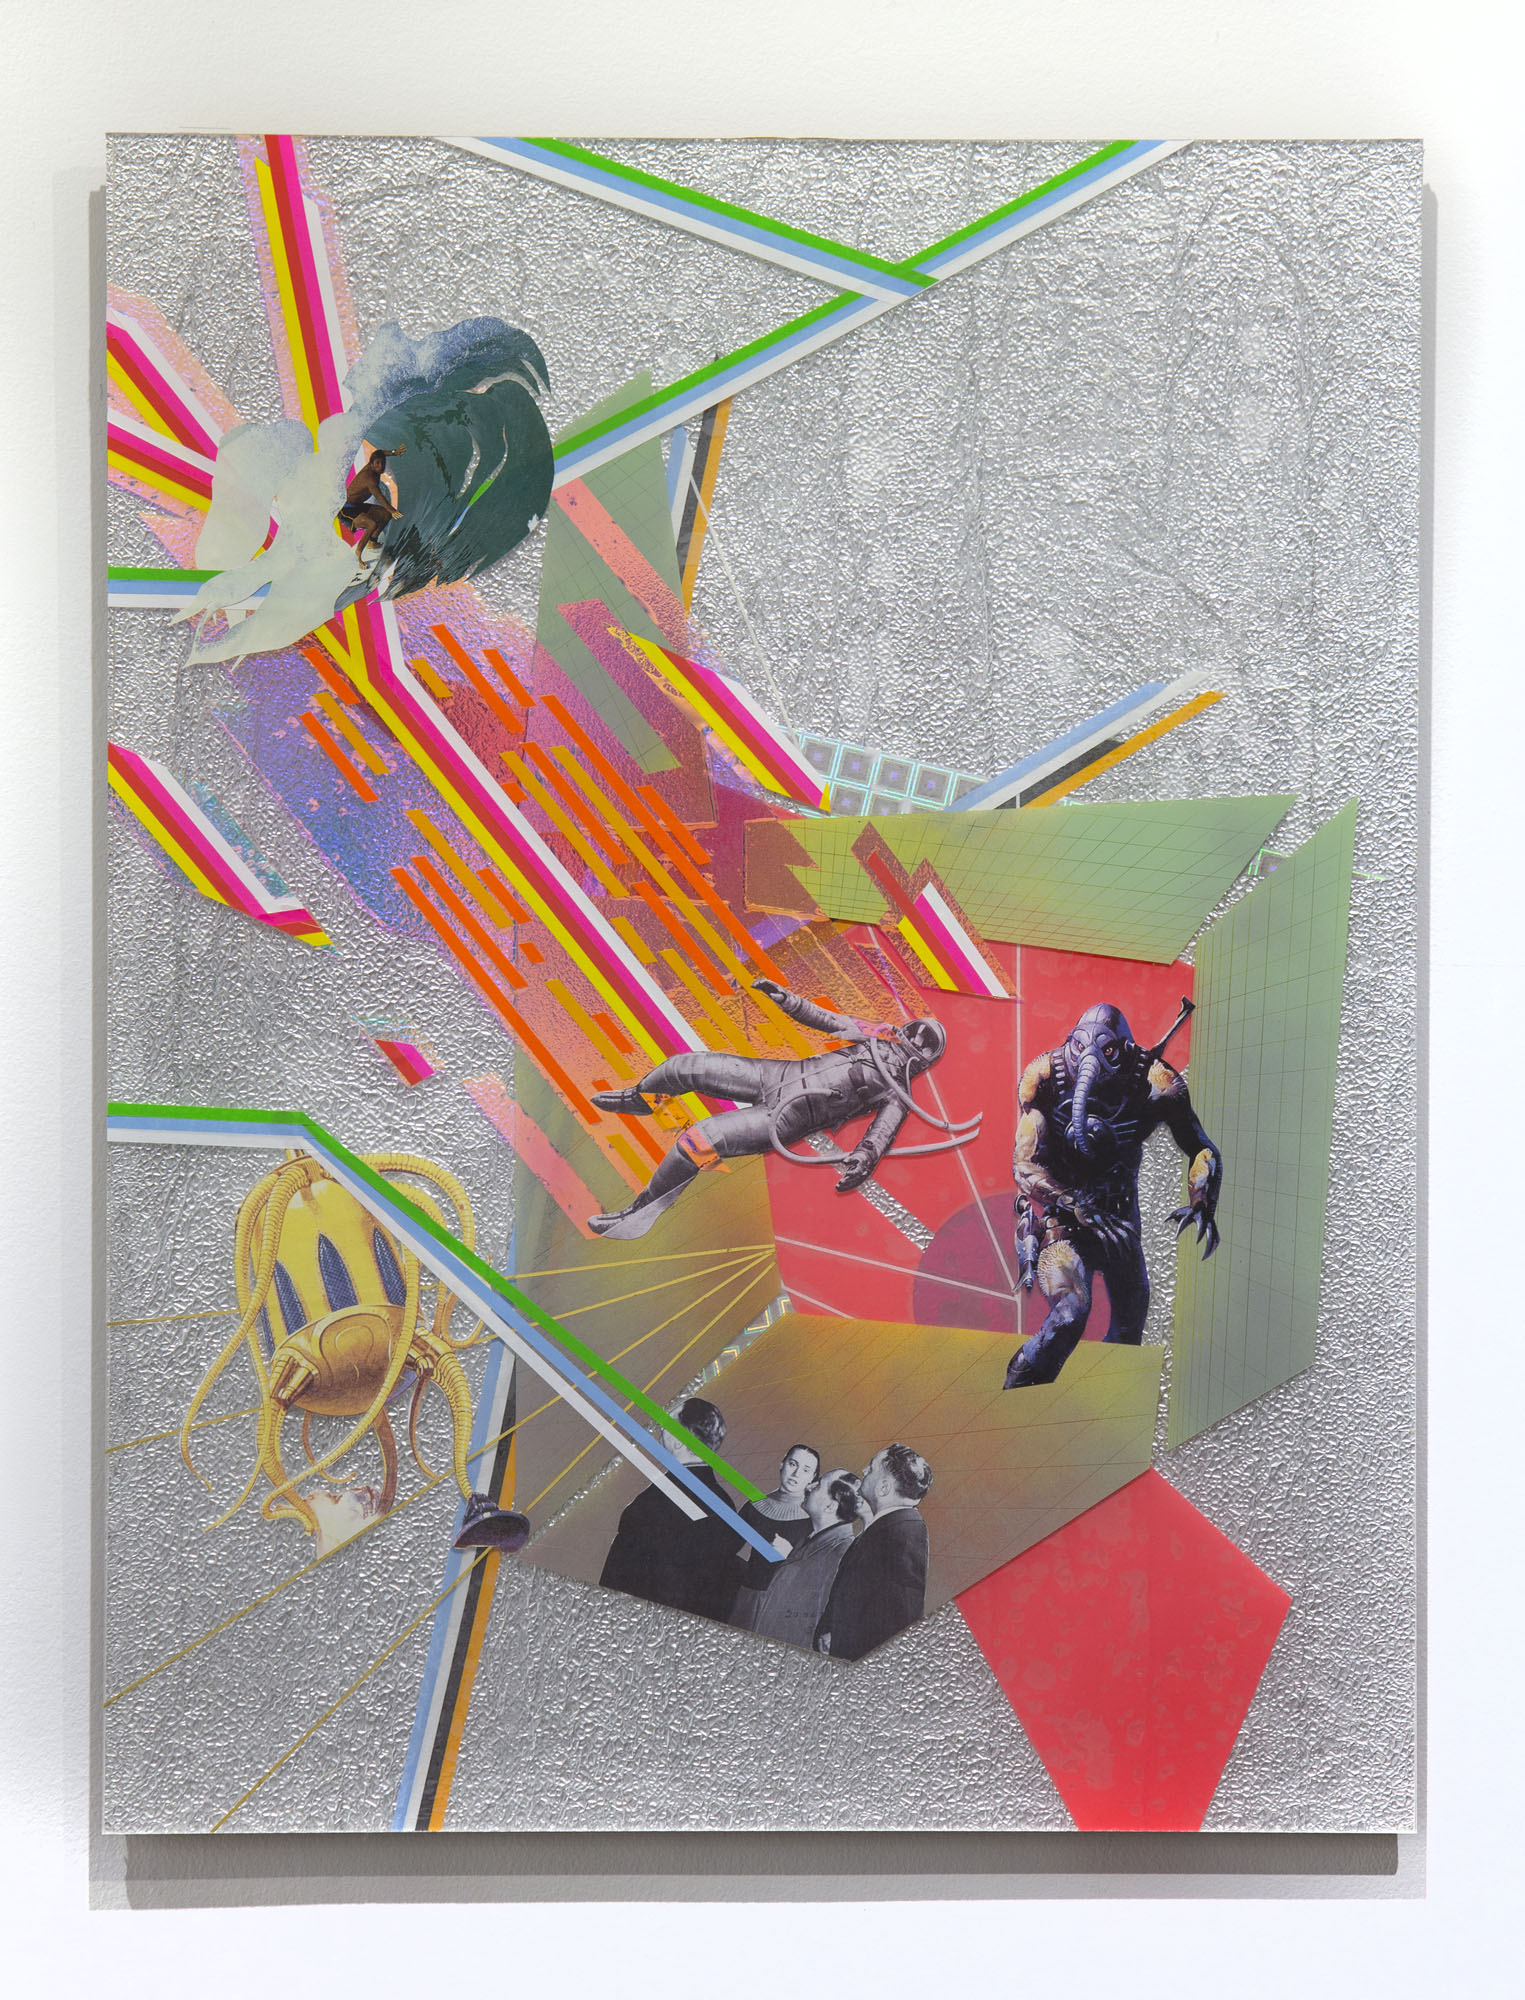    I’ll Miss You More Than Anything In My Life   2018 Vinyl, tape, Mylar, cellophane, spray paint, and paper on plexiglass 30h x 24w in 